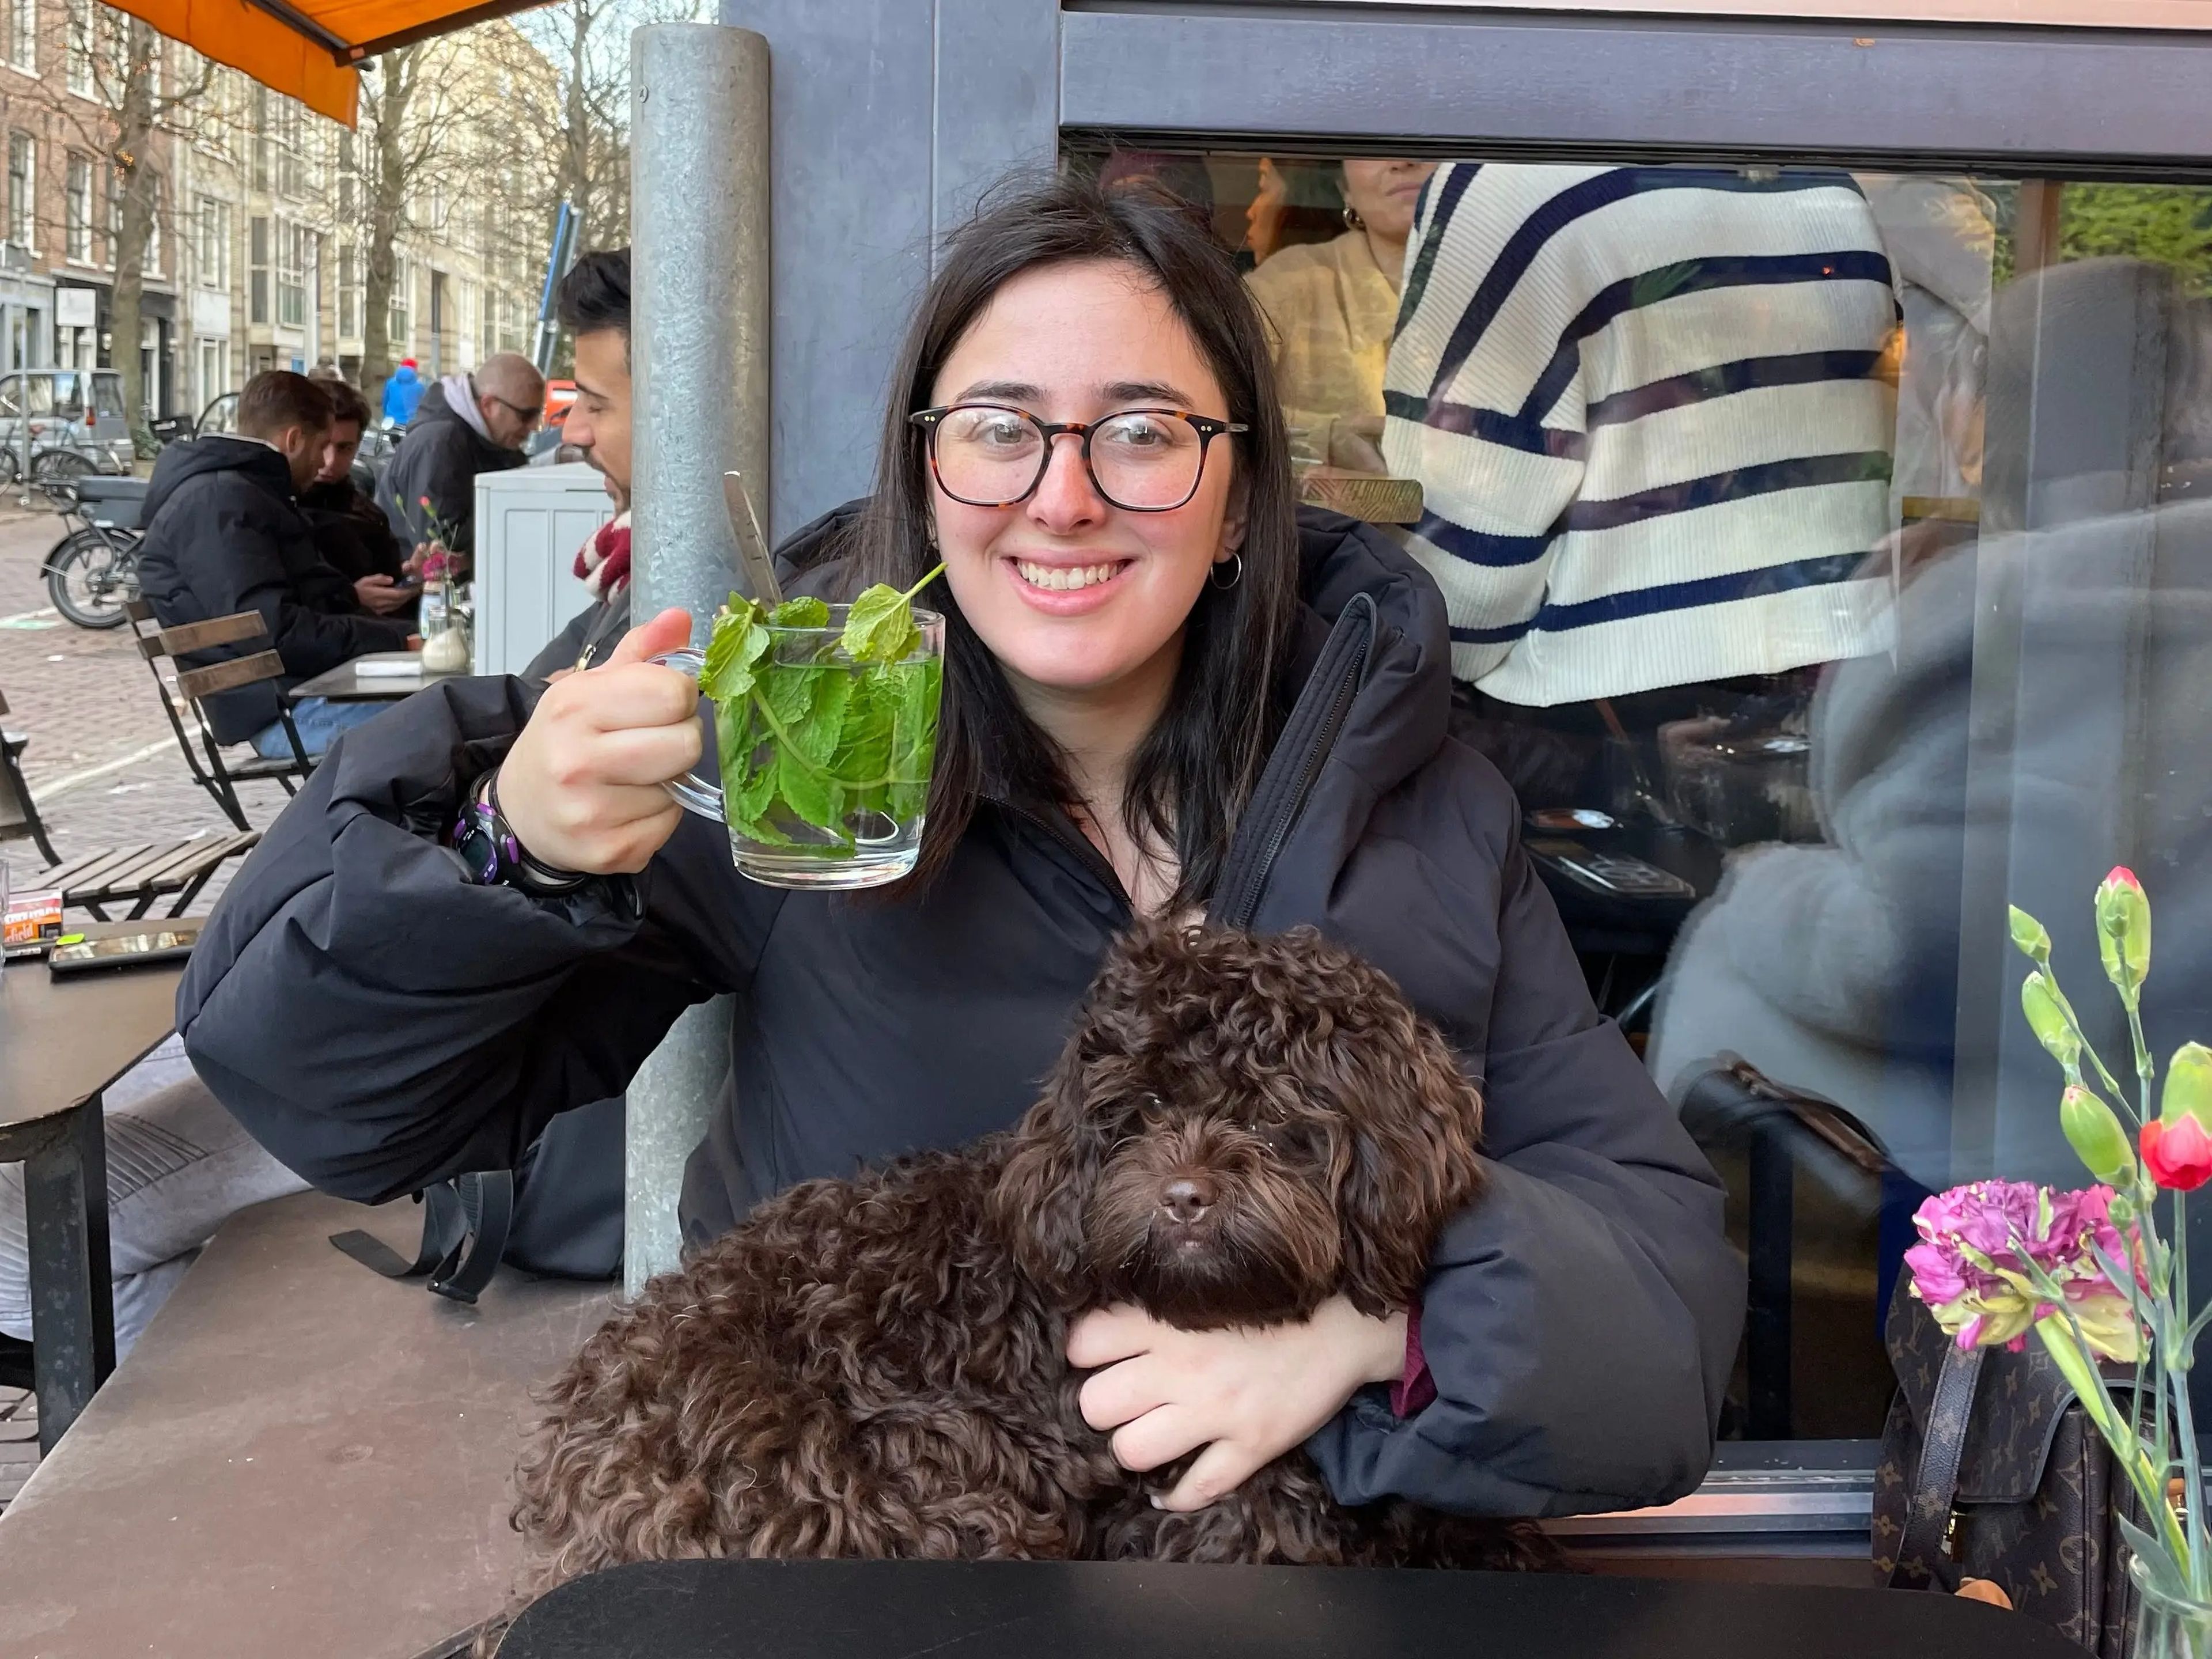 hannah holding a class of green tea with a dog on her lap at a restaurant in europe